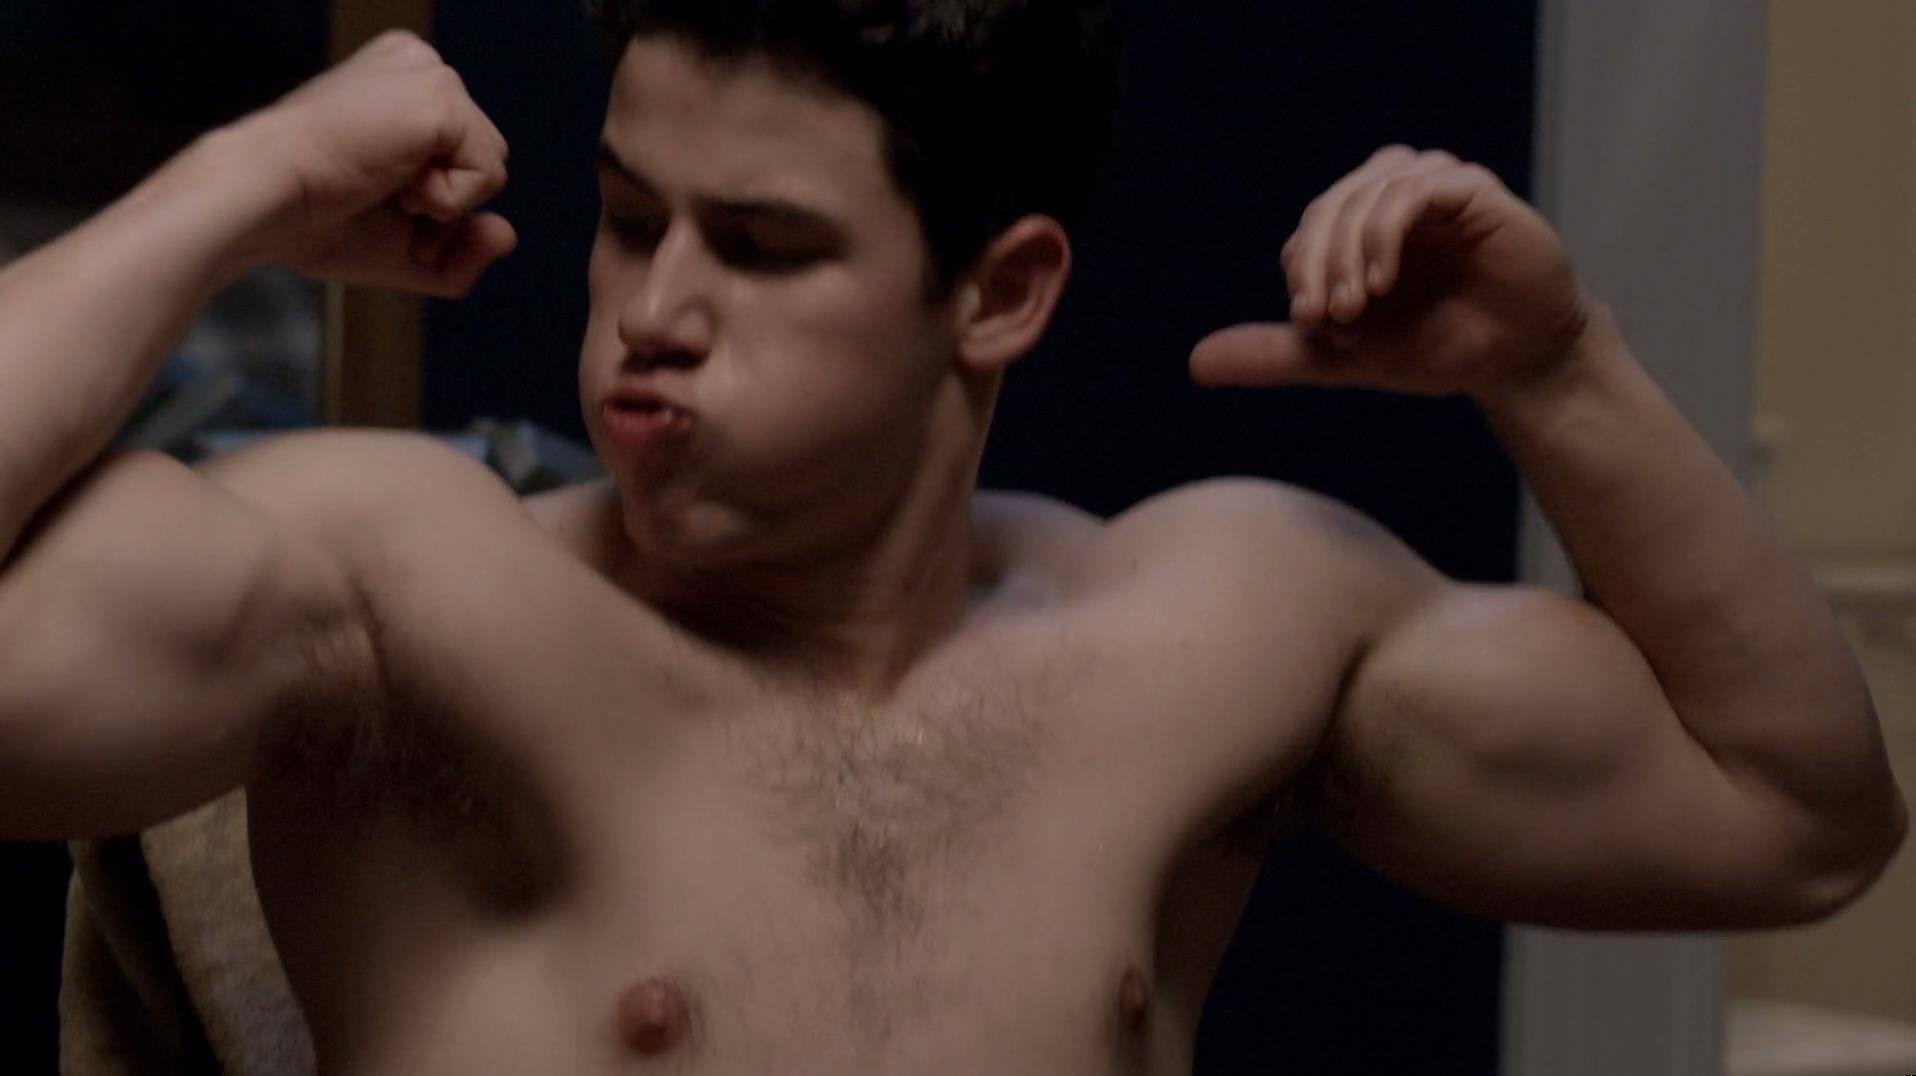 Nick Jonas Opens Up About His Gay Roles